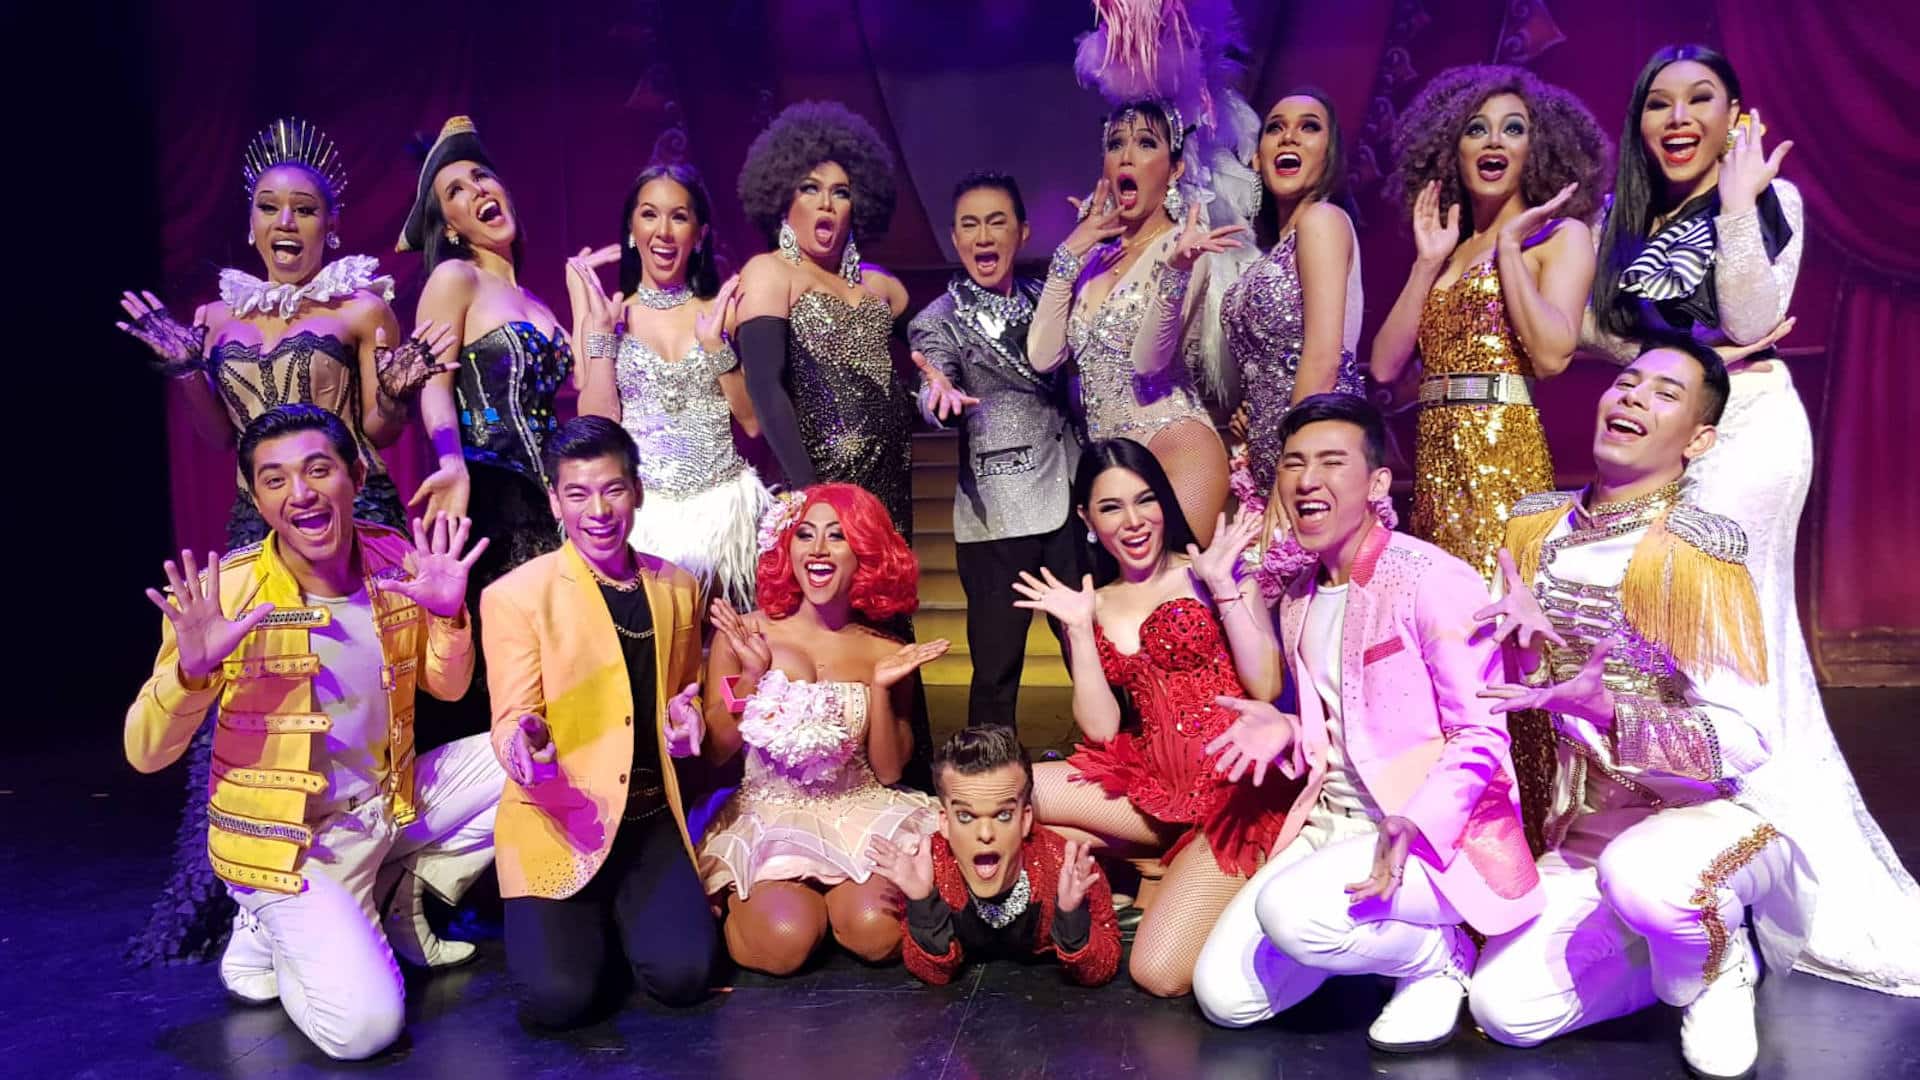 The cast of Ladyboys of Bangkok - colourful, quirky and vibrant